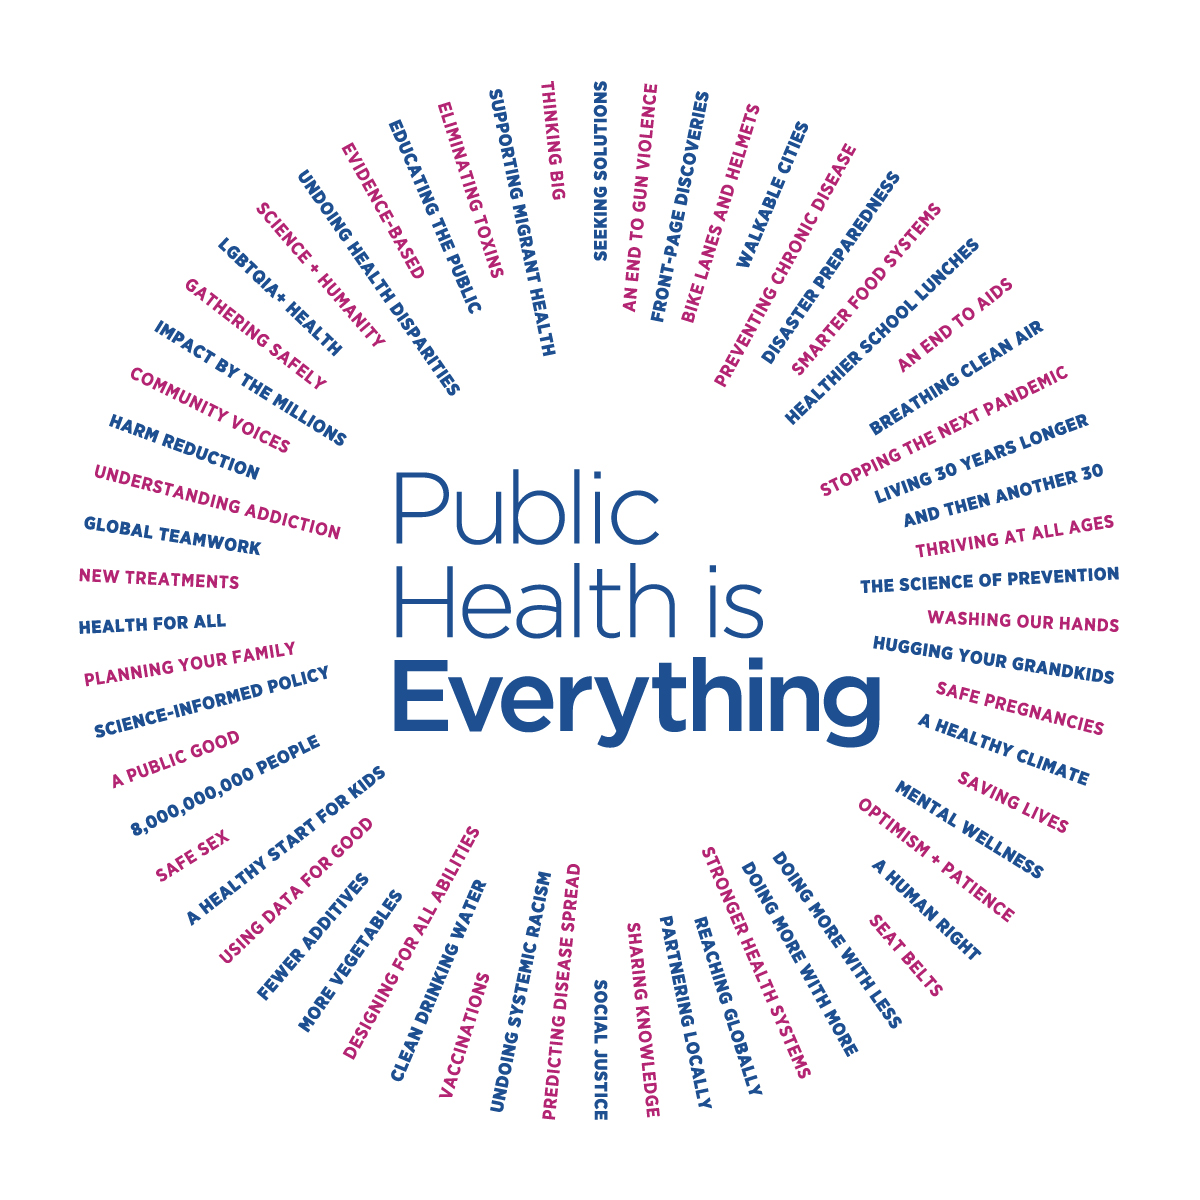 Full Public Health is Everything campaign logo